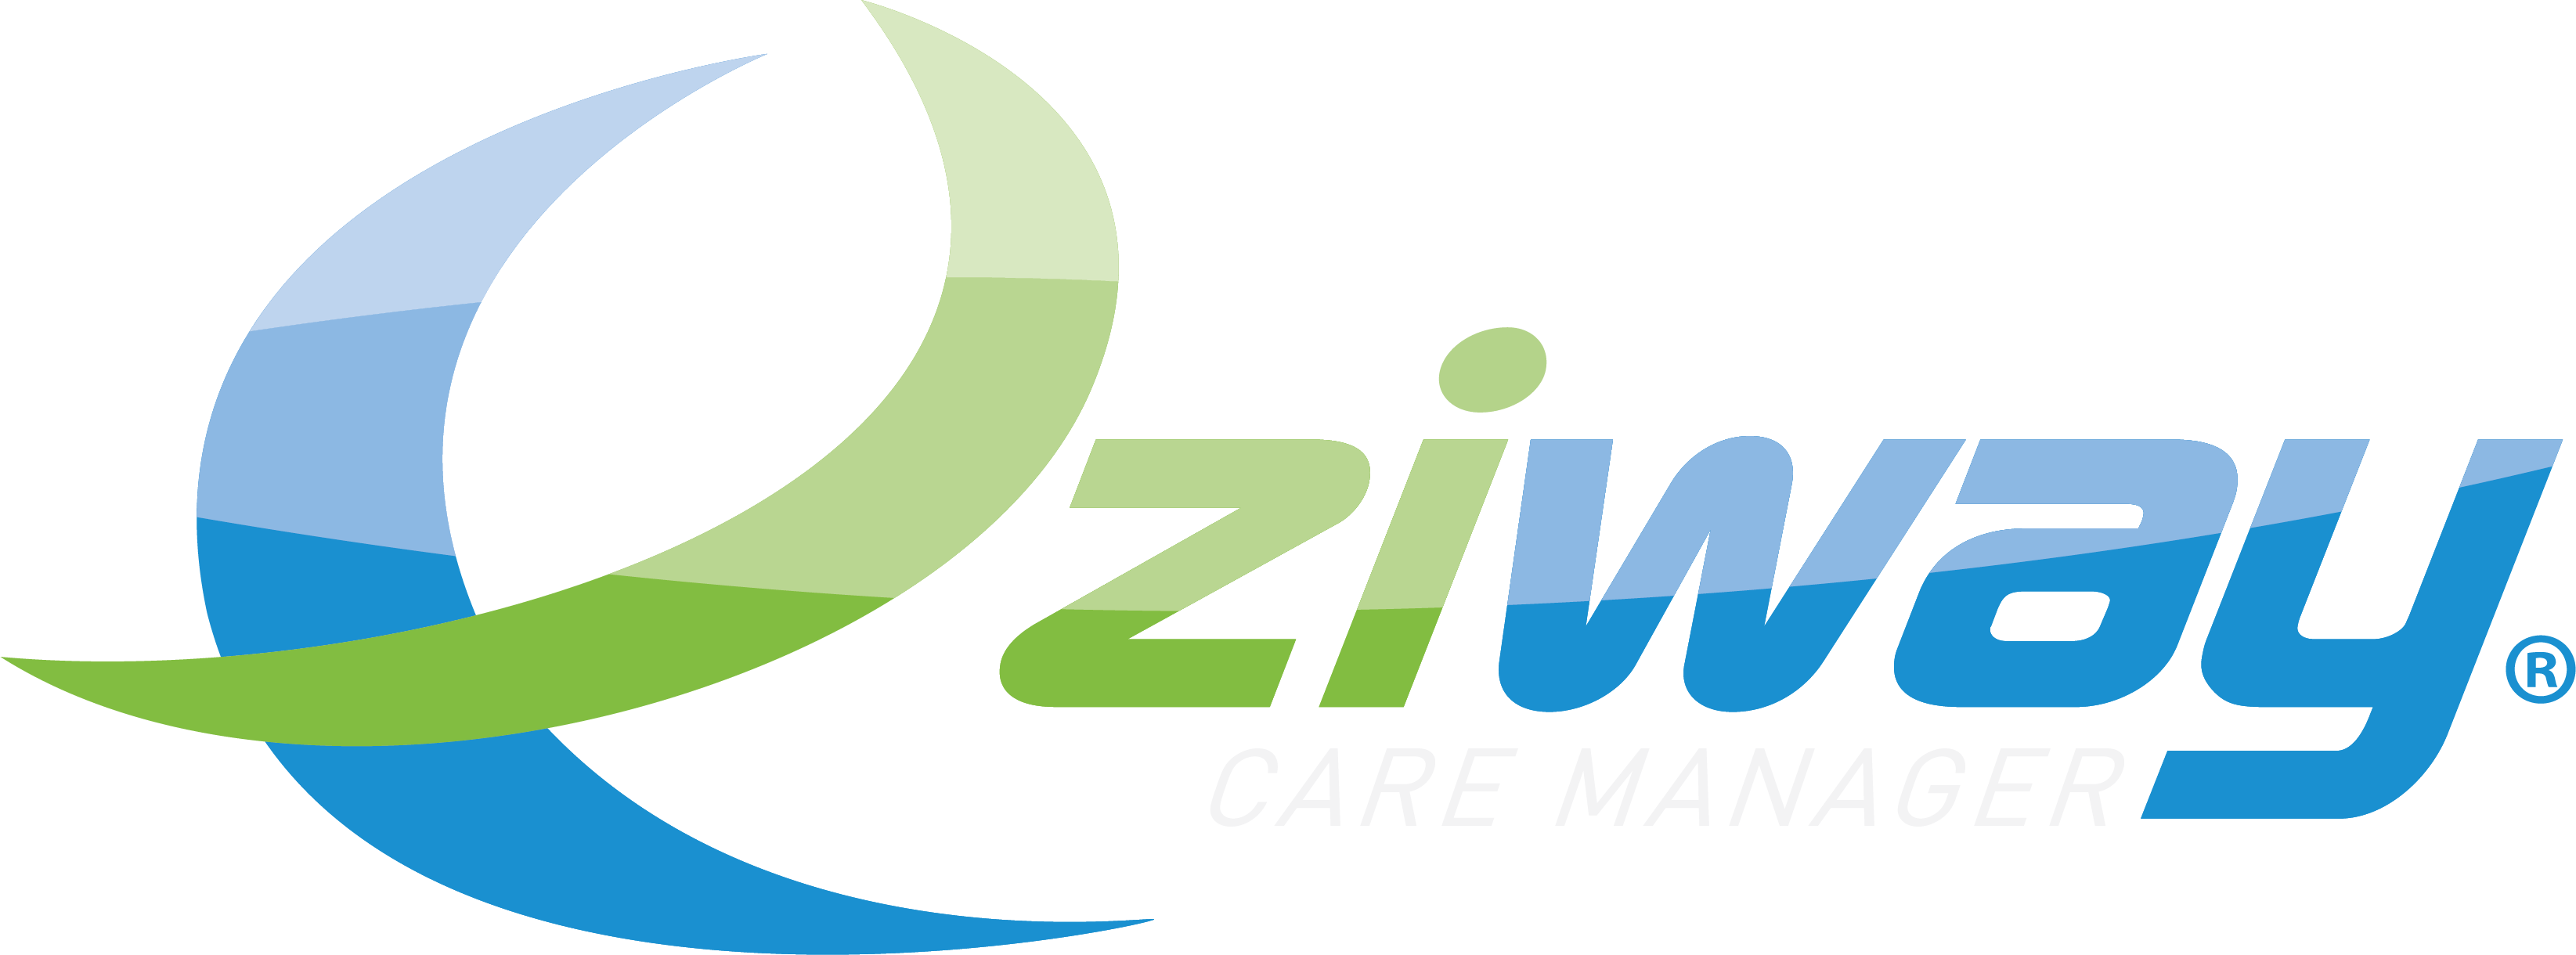 Eziway Care Manager